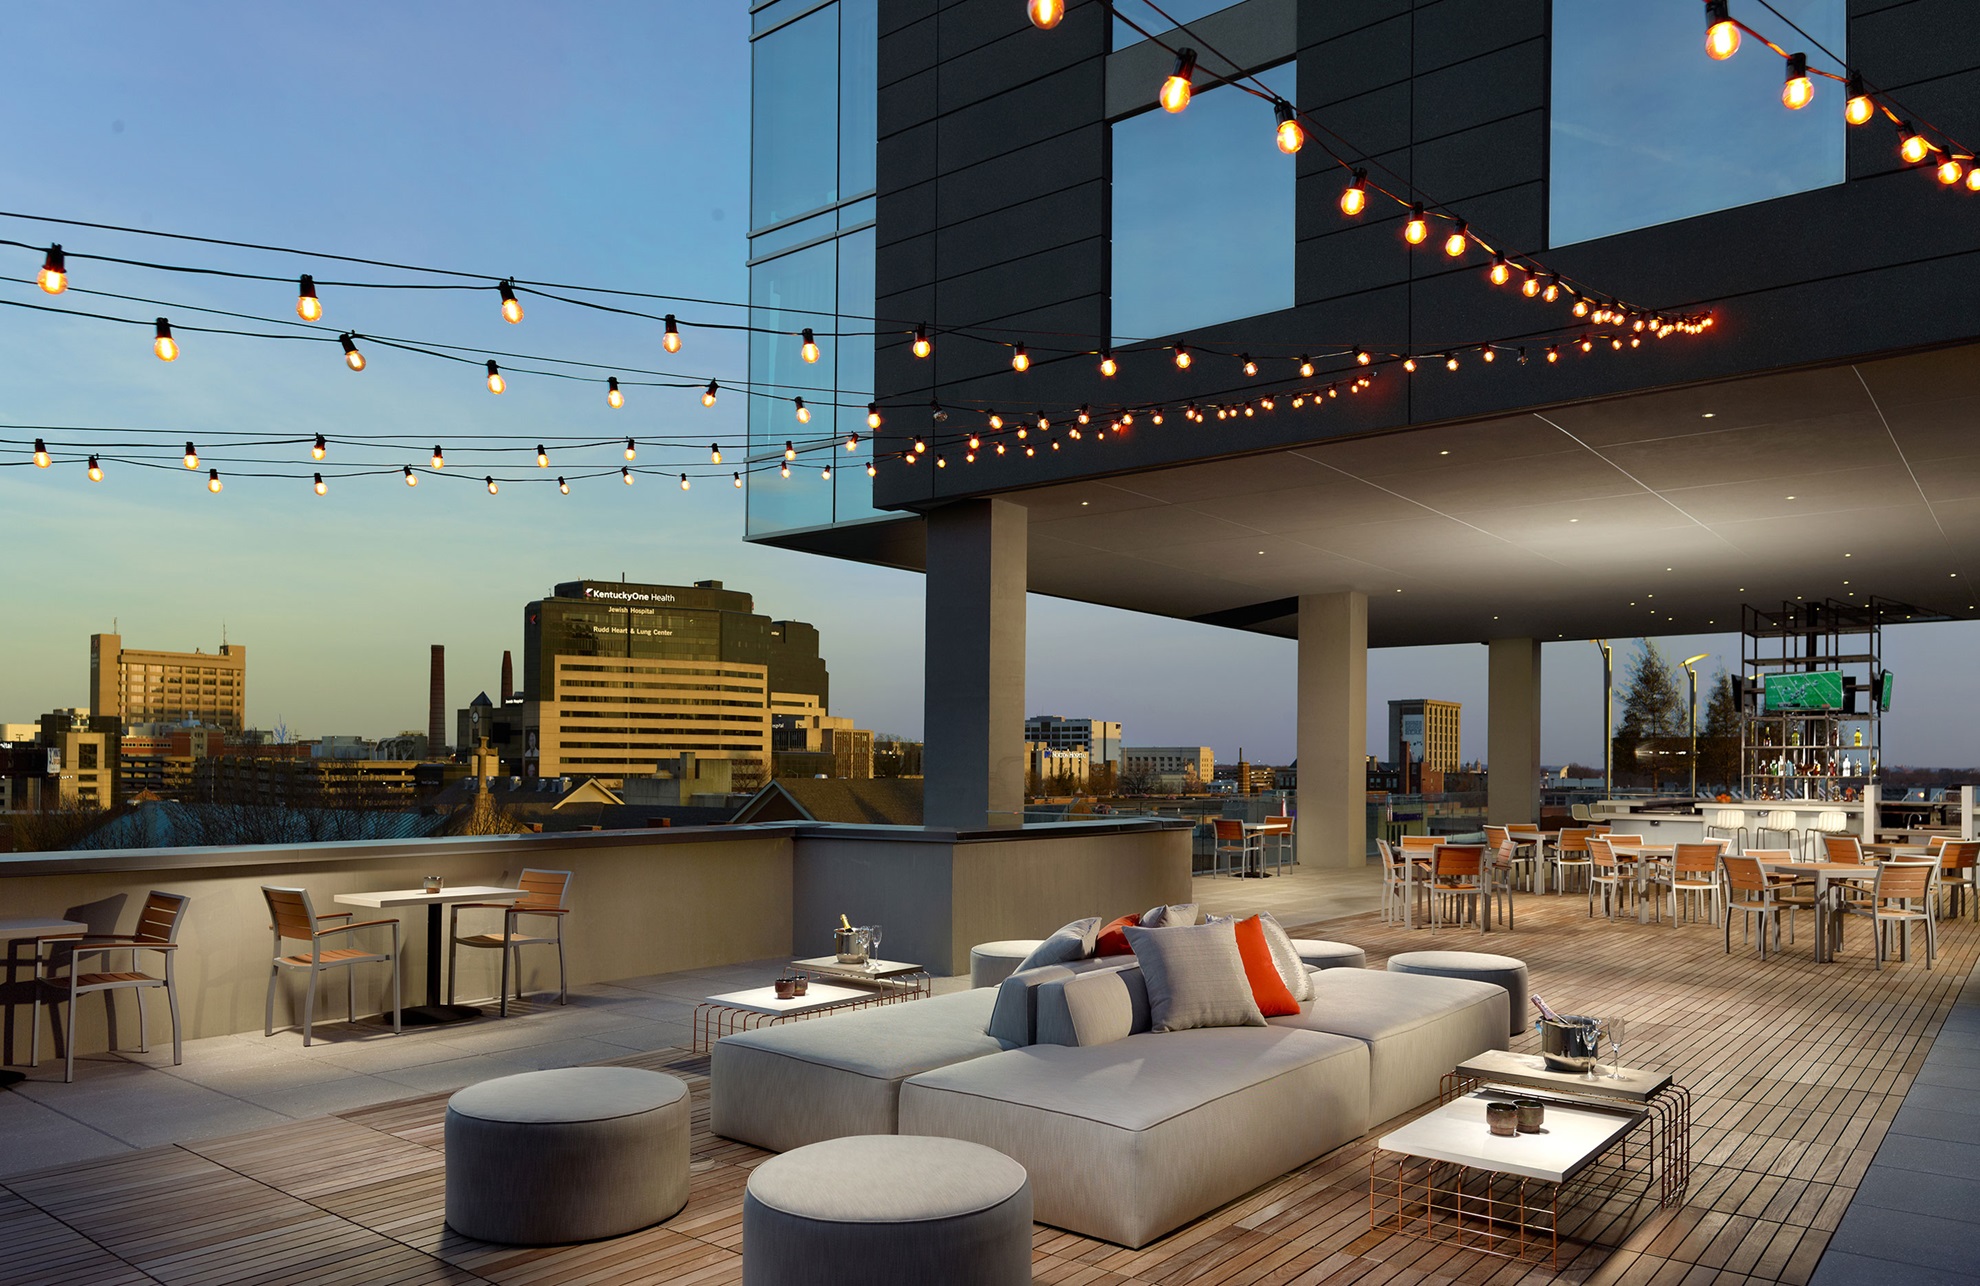 Beautiful terrace with luxurious seating and view of the city.